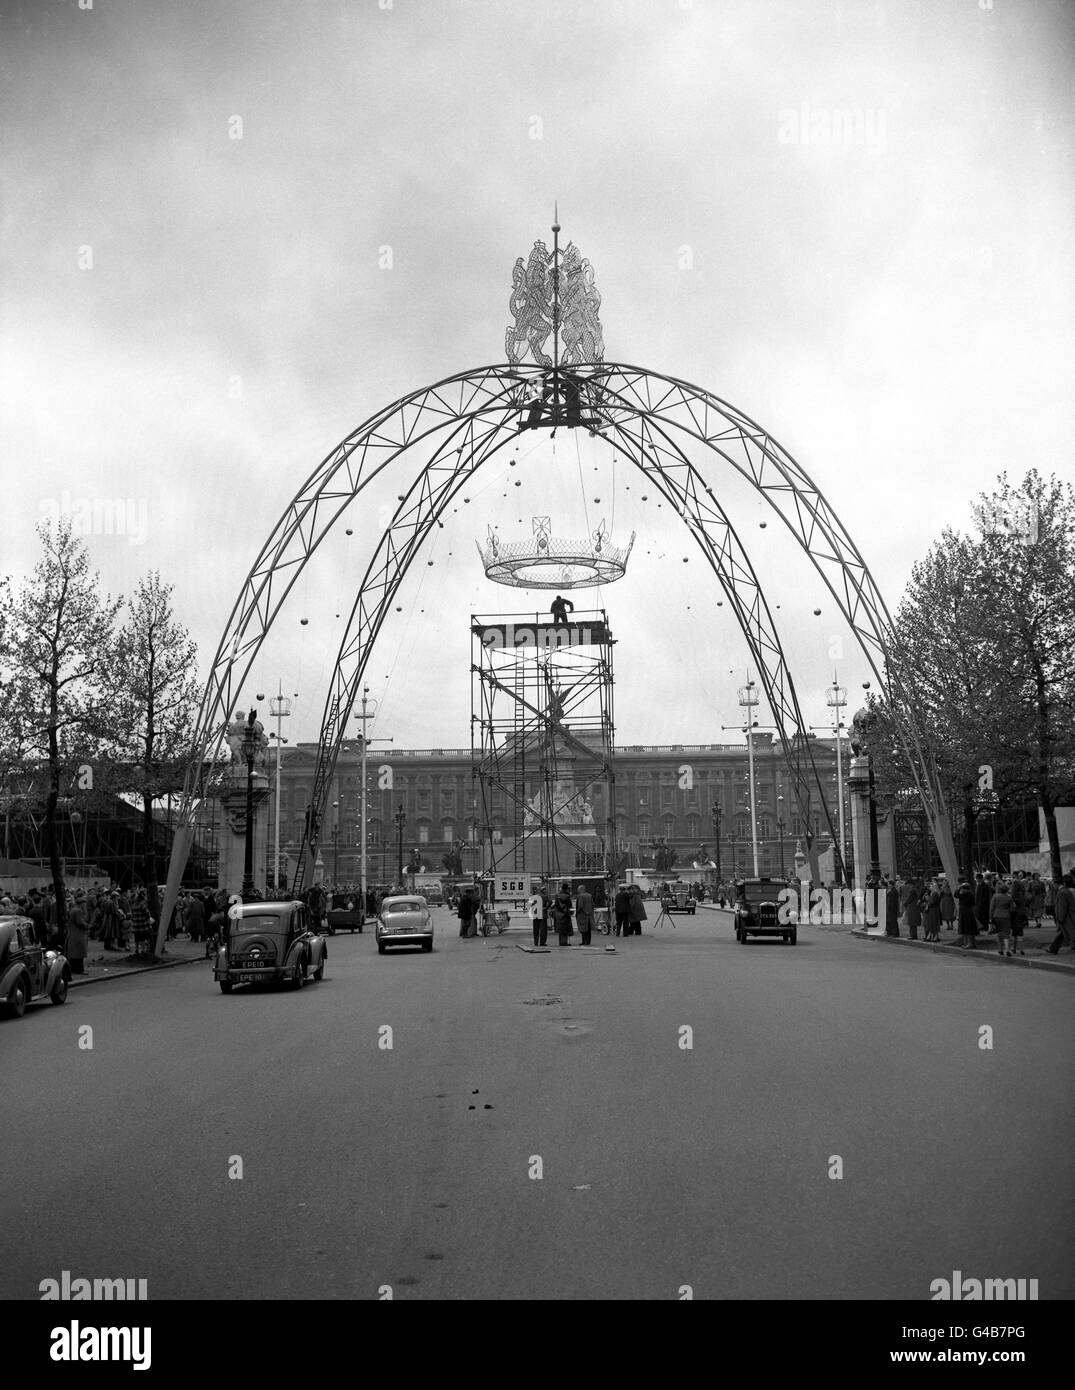 With crowds gathered on the pavements, and with Buckingham Palace as the backcloth, workmen hoist into position a replica of a princess's coronet, that will hang from a 65 foot arch - one of four to be part of the Coronation decorations in The Mall, London. Topping the arch are a lion and a unicorn, in steel tubing. Stock Photo